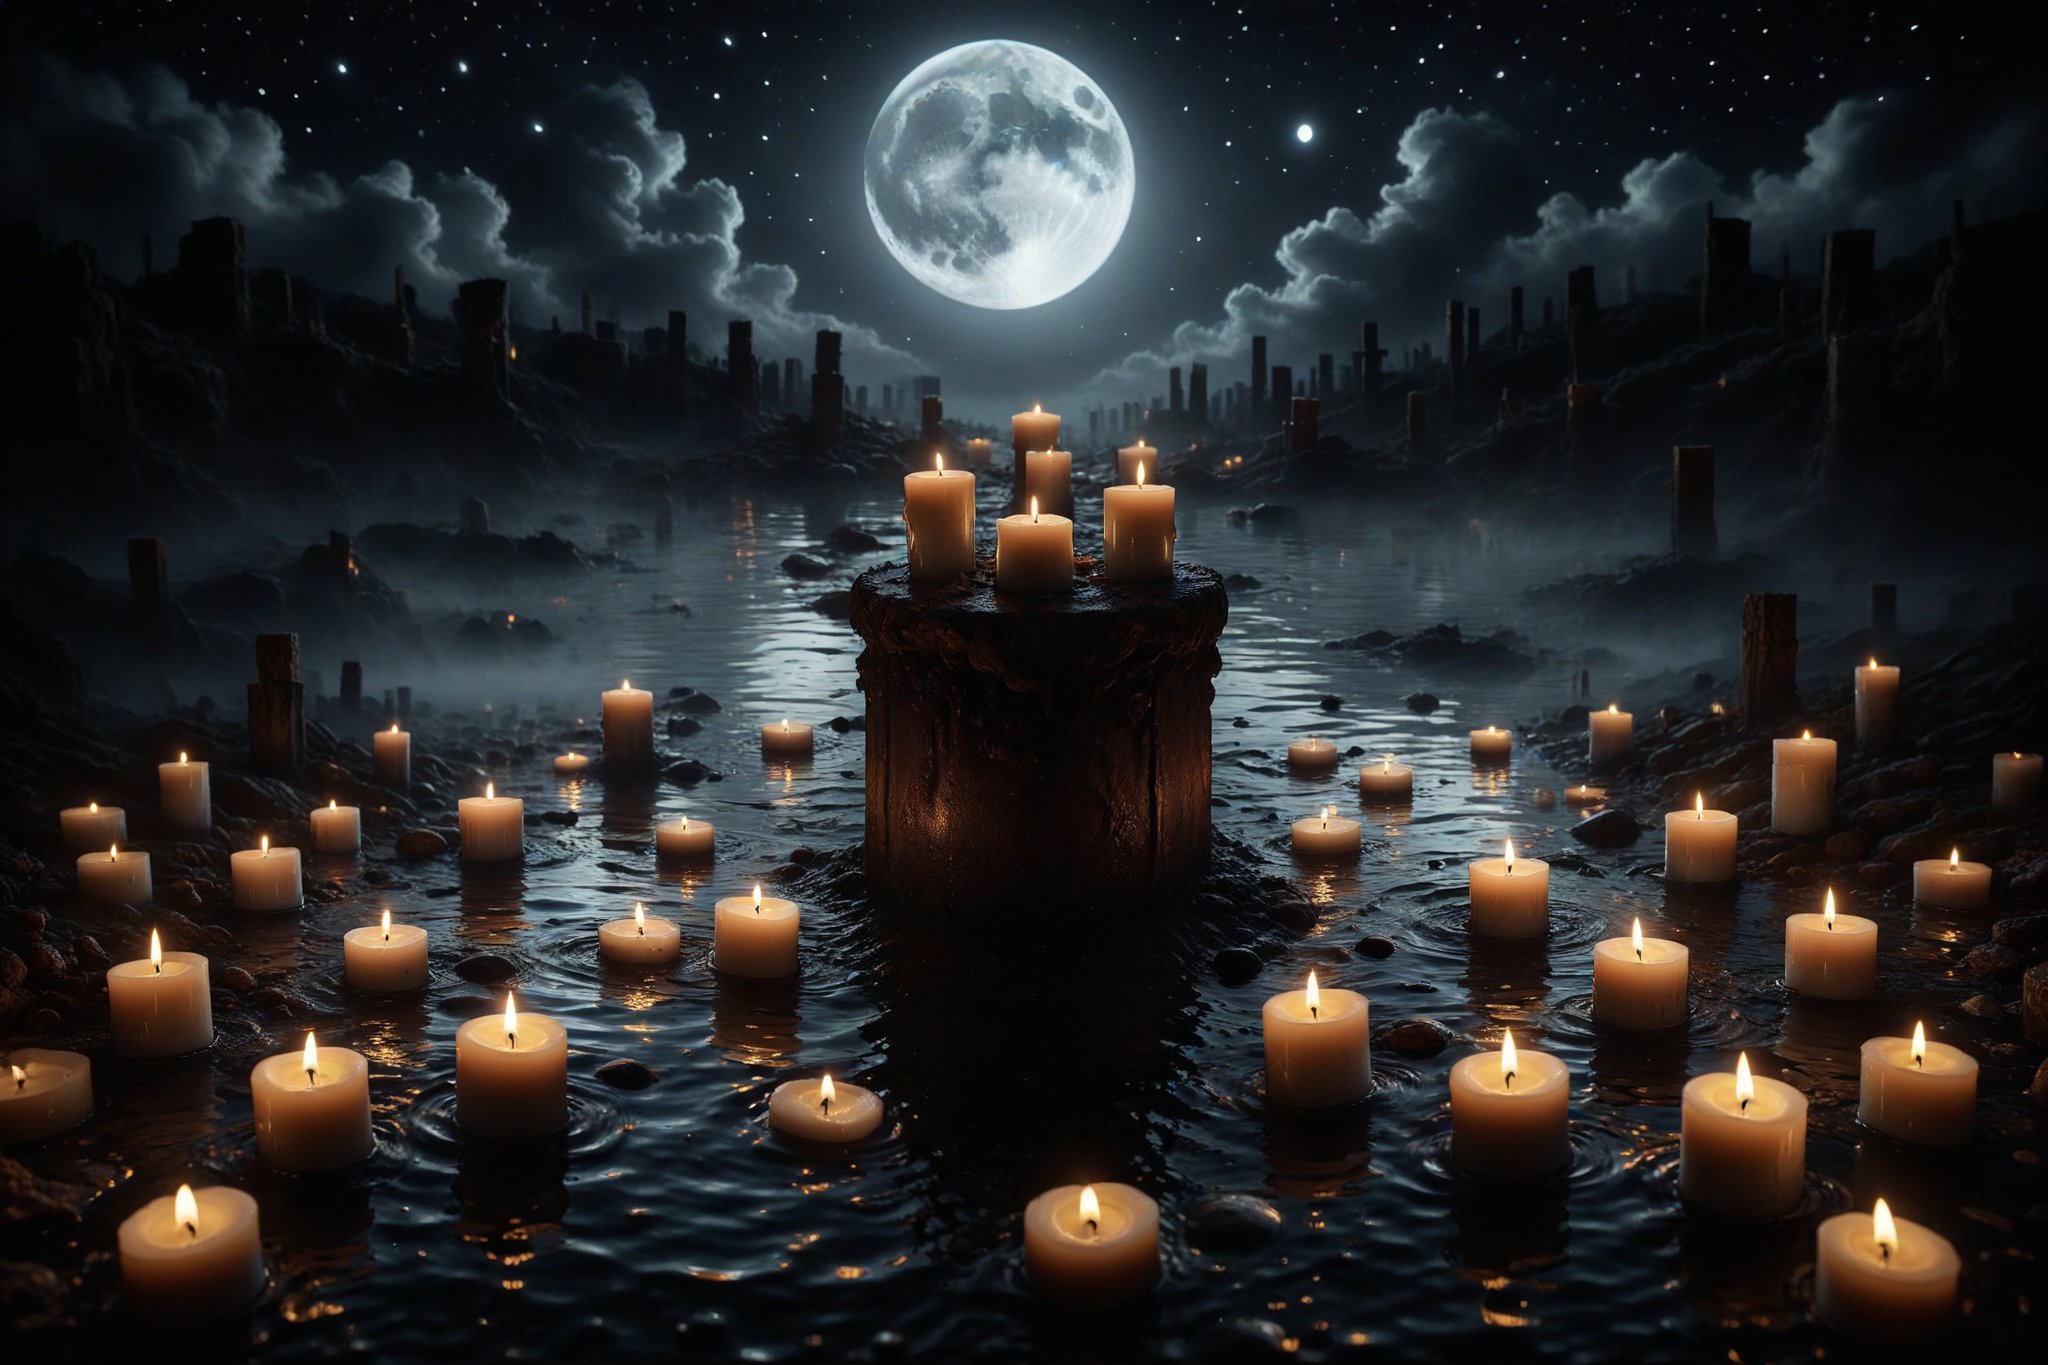 A deep well filled with dark waters and silver reflections of the waxing moon, surrounded by lit candles flickering in the darkness of a starless night.